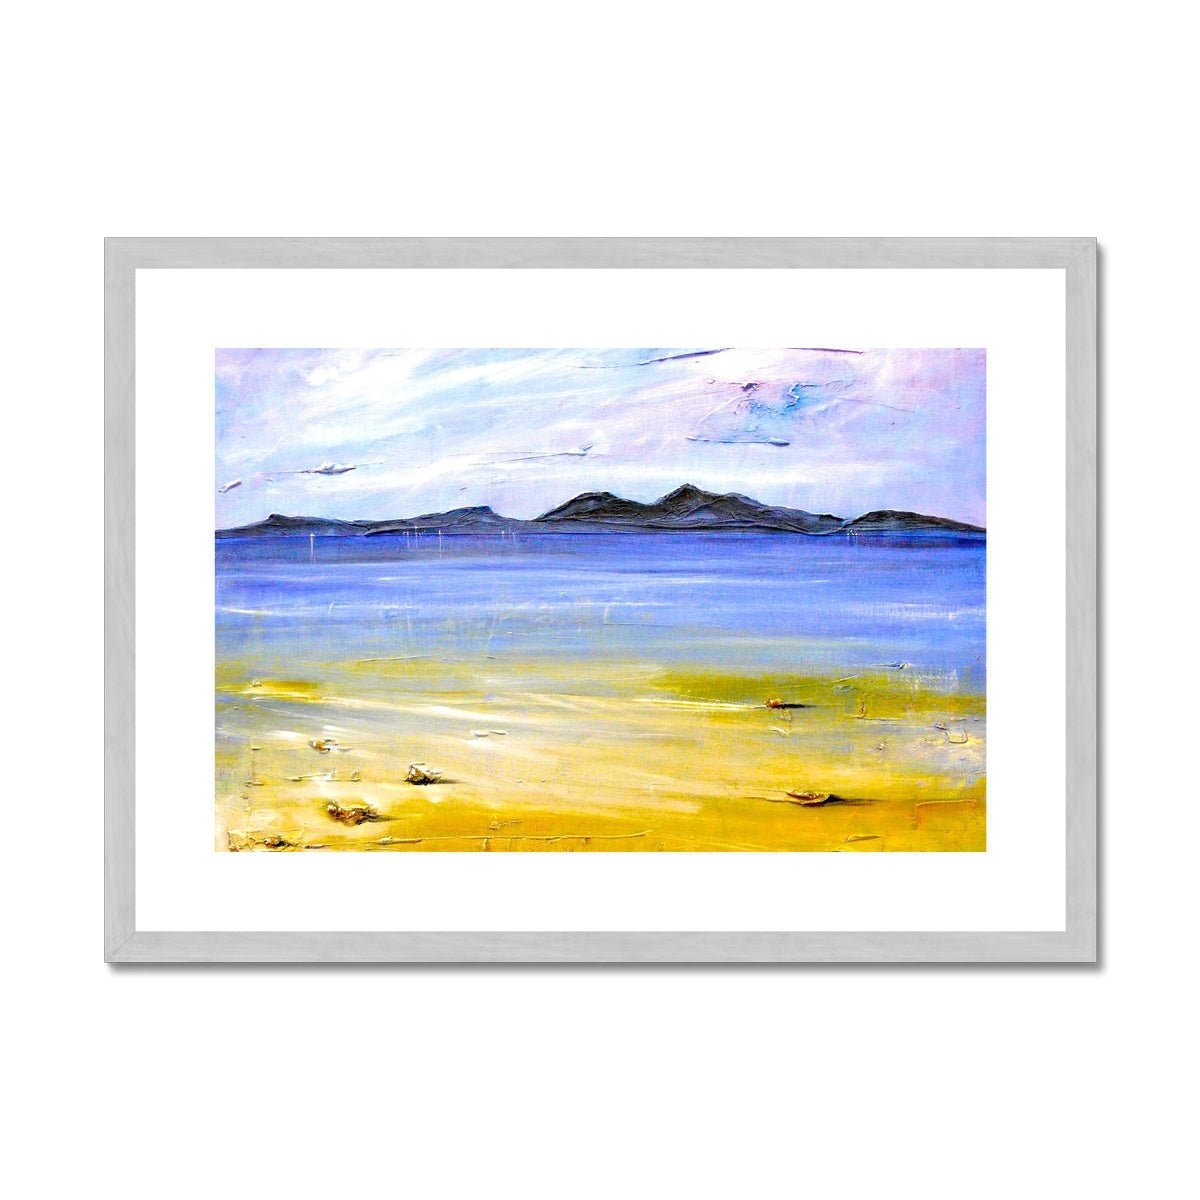 Camusdarach Beach Arisaig Painting | Antique Framed & Mounted Prints From Scotland-Antique Framed & Mounted Prints-Scottish Highlands & Lowlands Art Gallery-A2 Landscape-Silver Frame-Paintings, Prints, Homeware, Art Gifts From Scotland By Scottish Artist Kevin Hunter